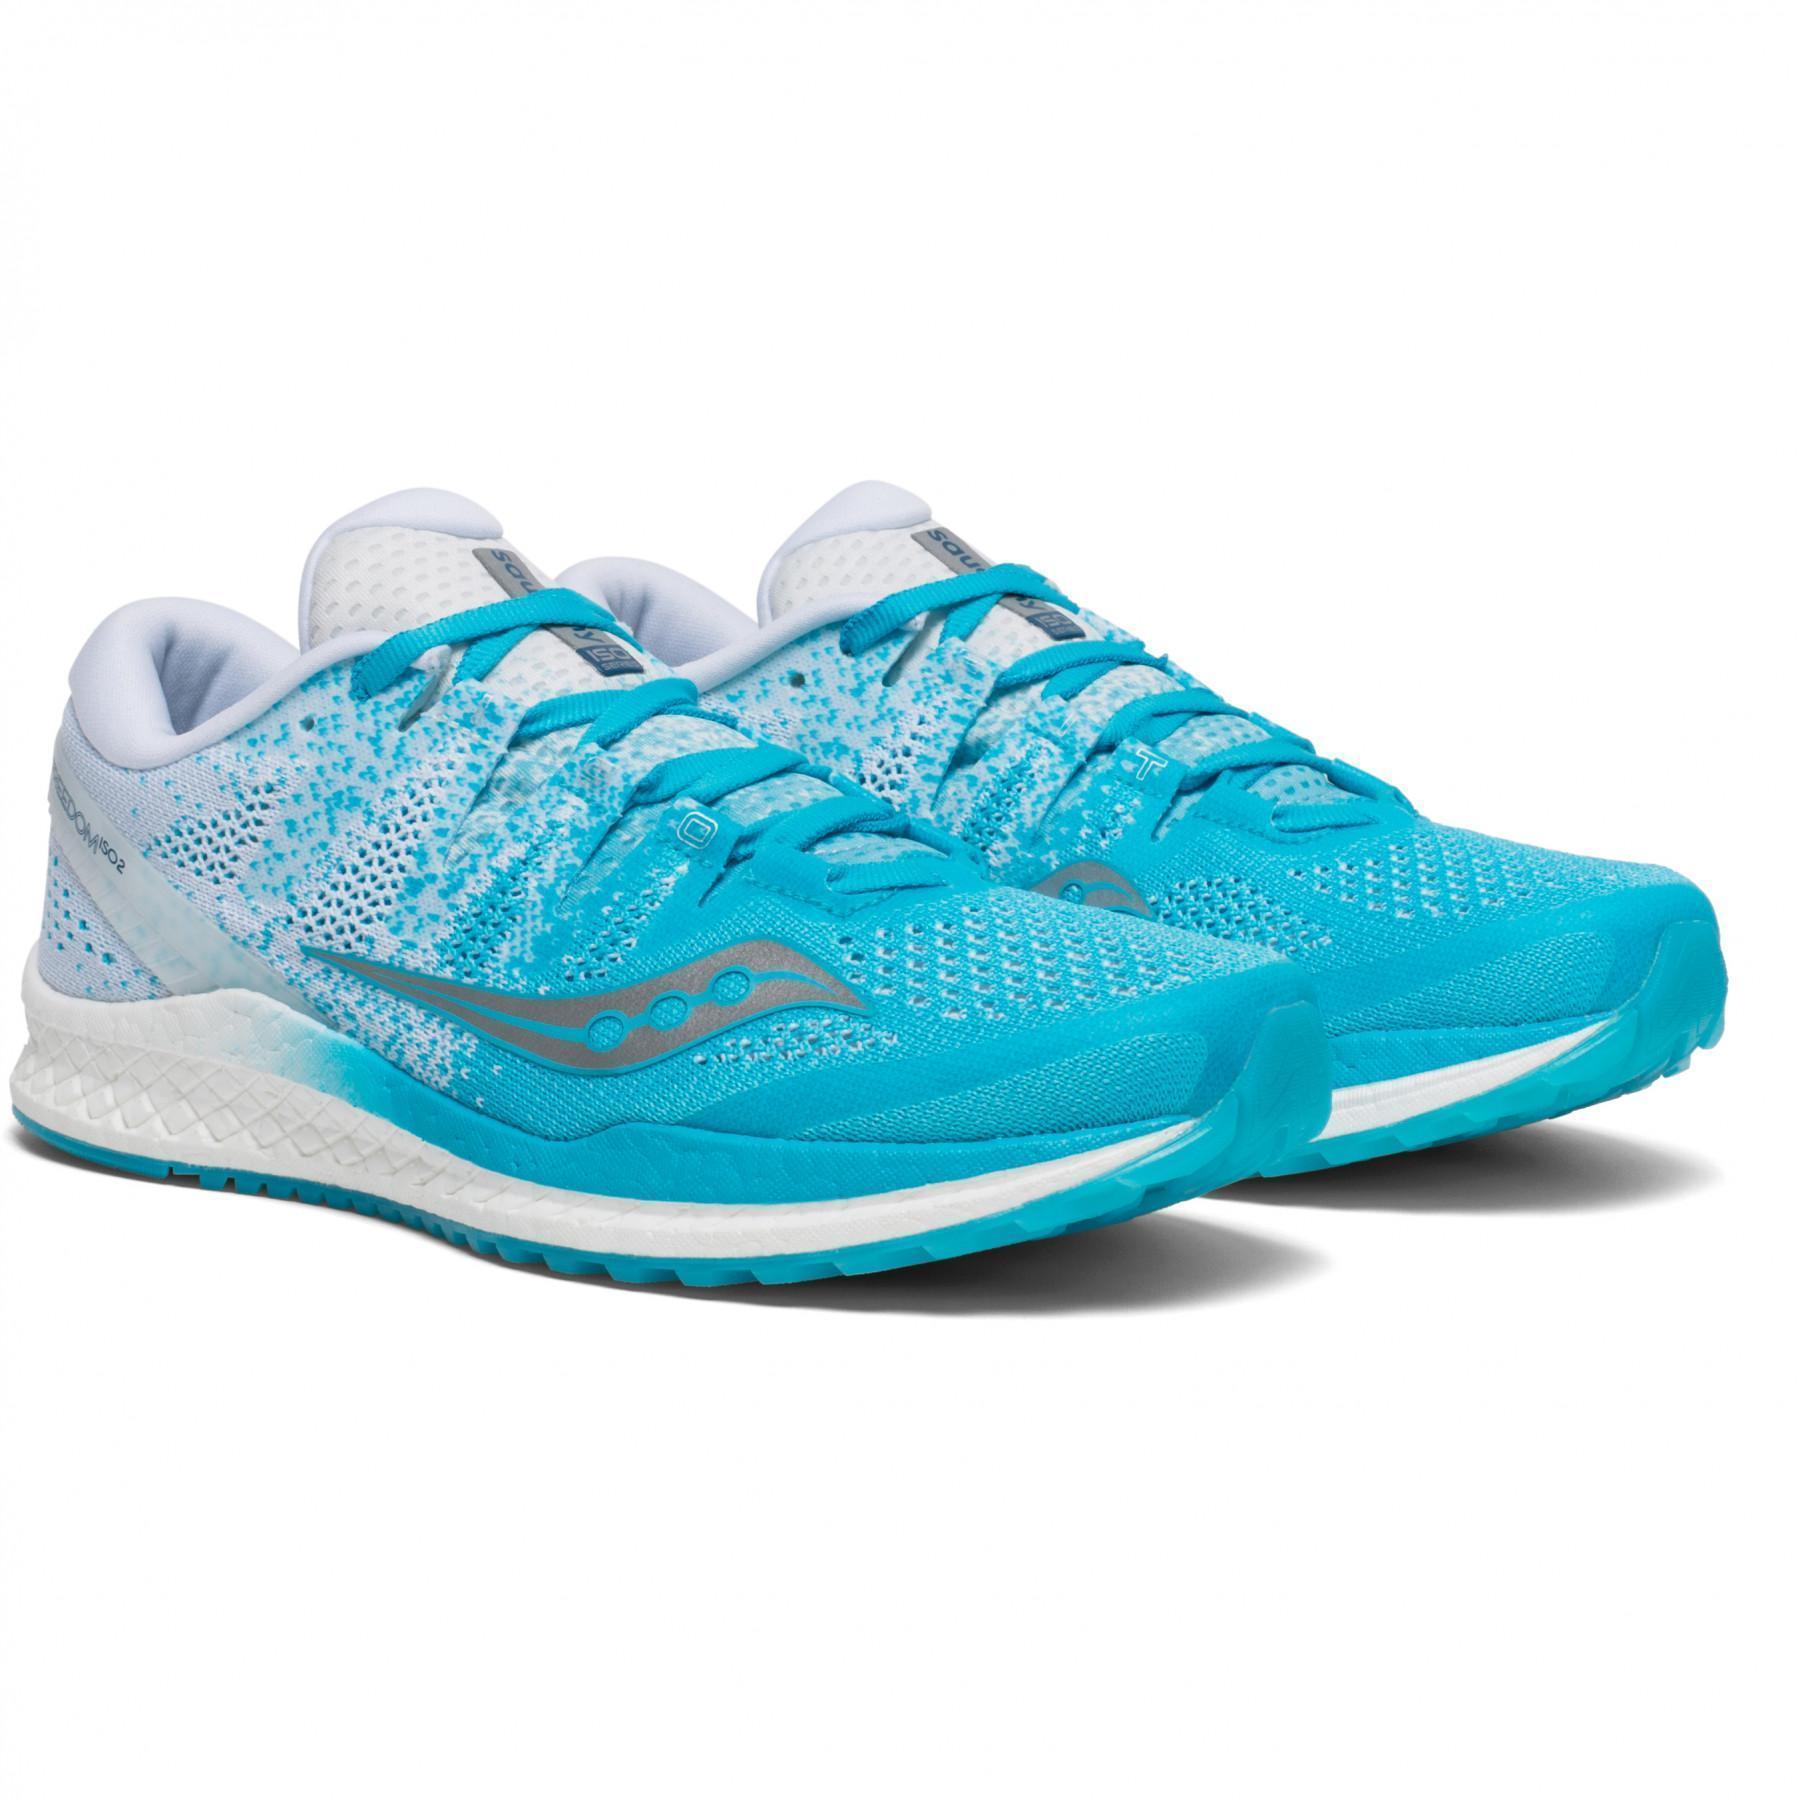 Chaussures de running femme Saucony Freedom ISO 2